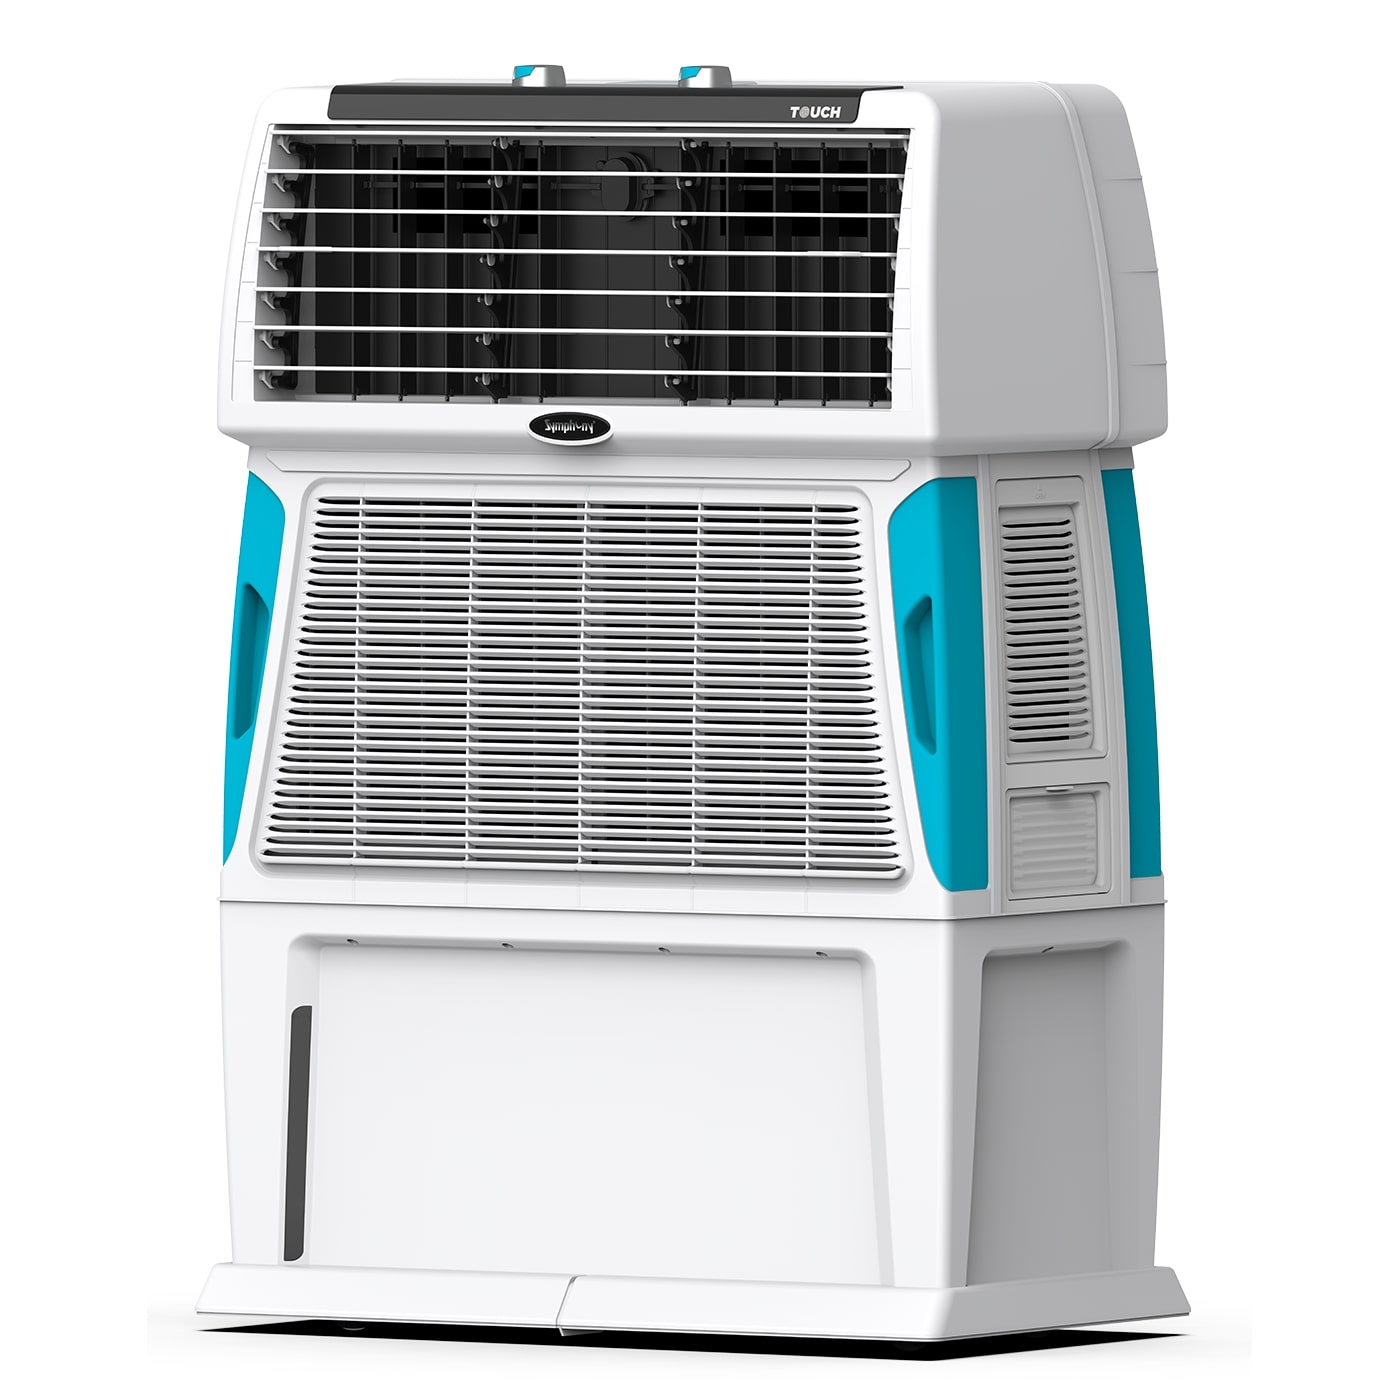 Top-rated room coolers with an 80-litre capacity